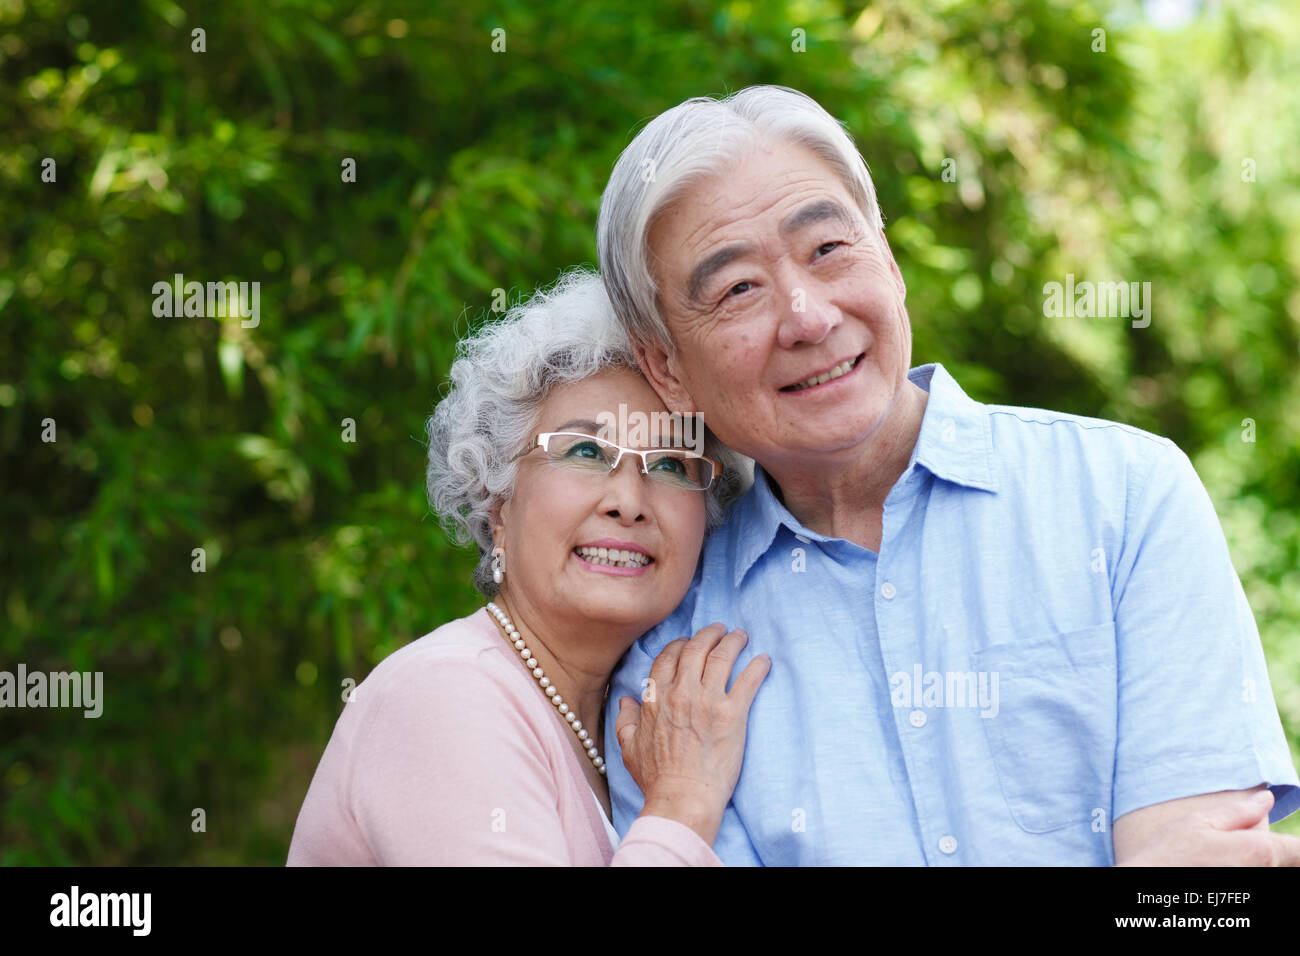 The old couple embracing in the outdoor courtyard Stock Photo